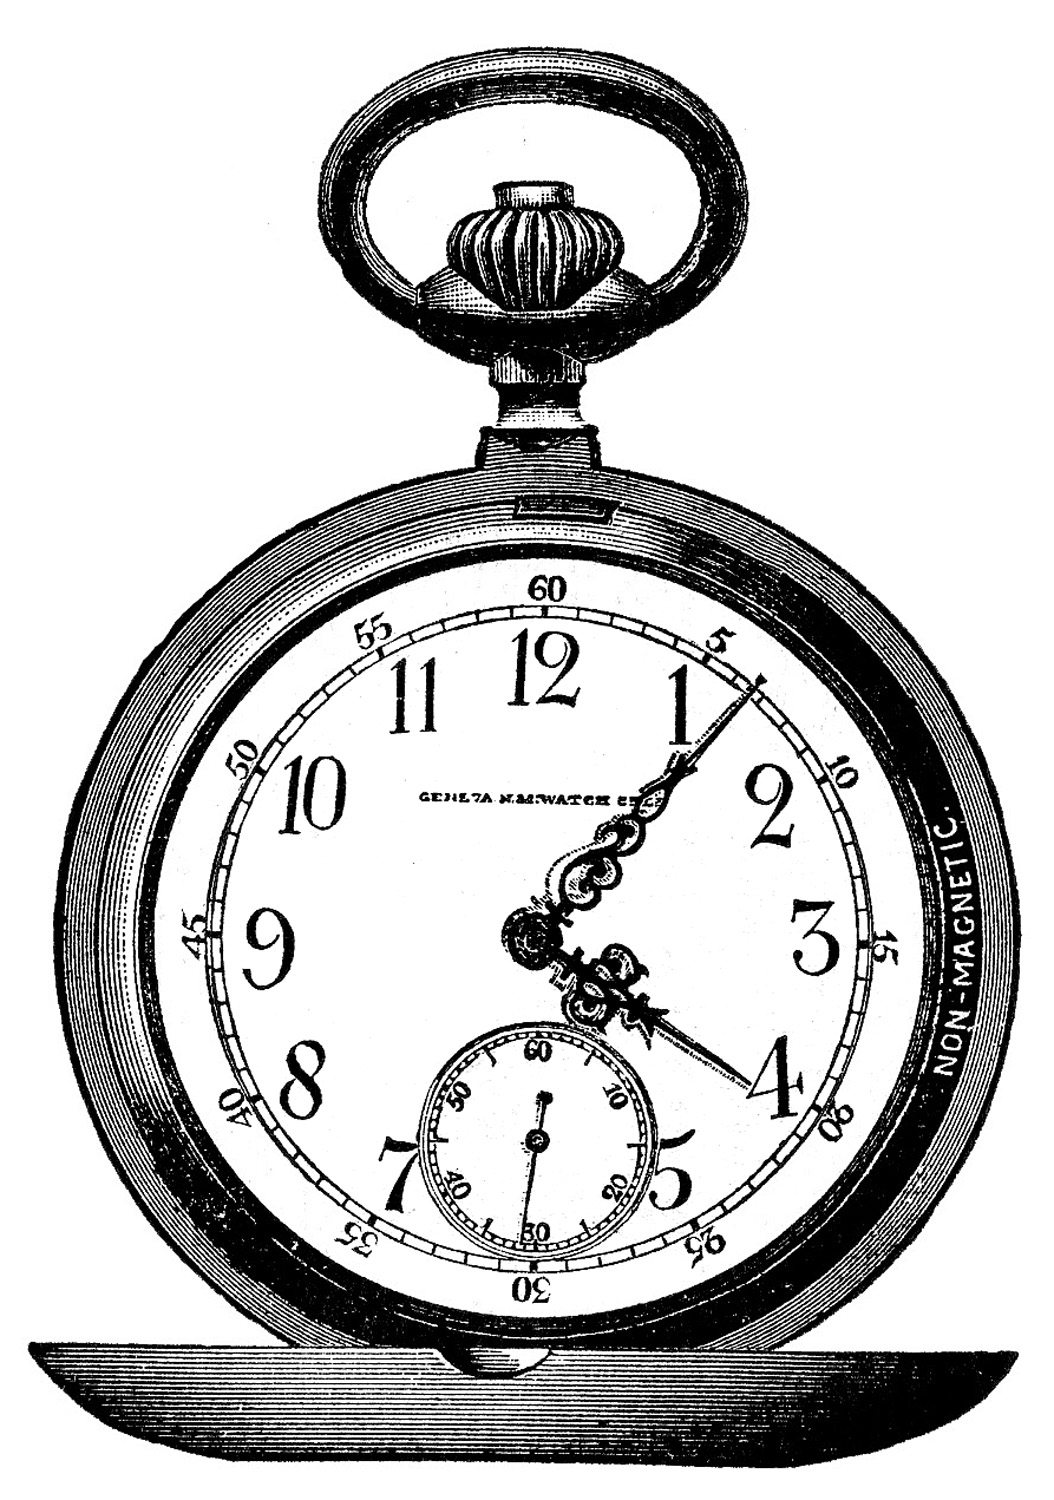 Clip Art   Marvelous Pocket Watch   Steampunk   The Graphics Fairy